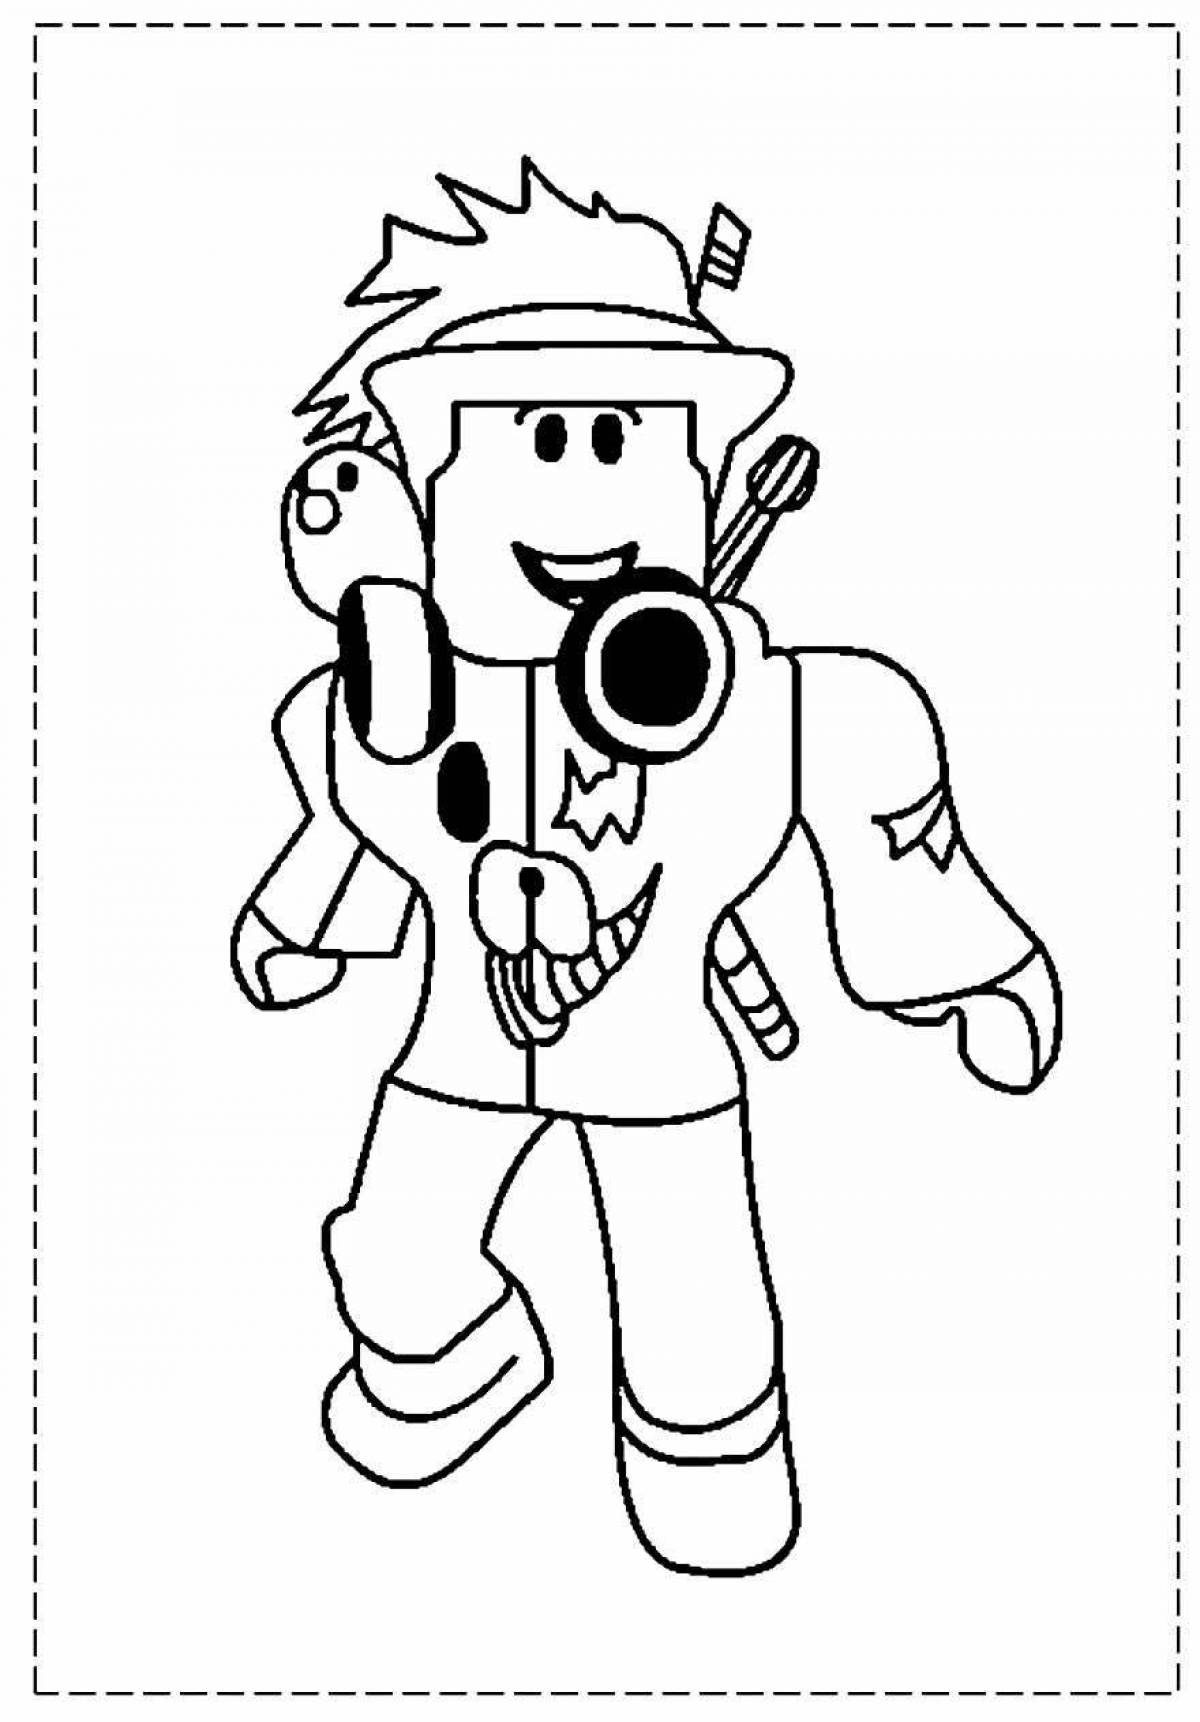 Roblox brookhaven coloring book